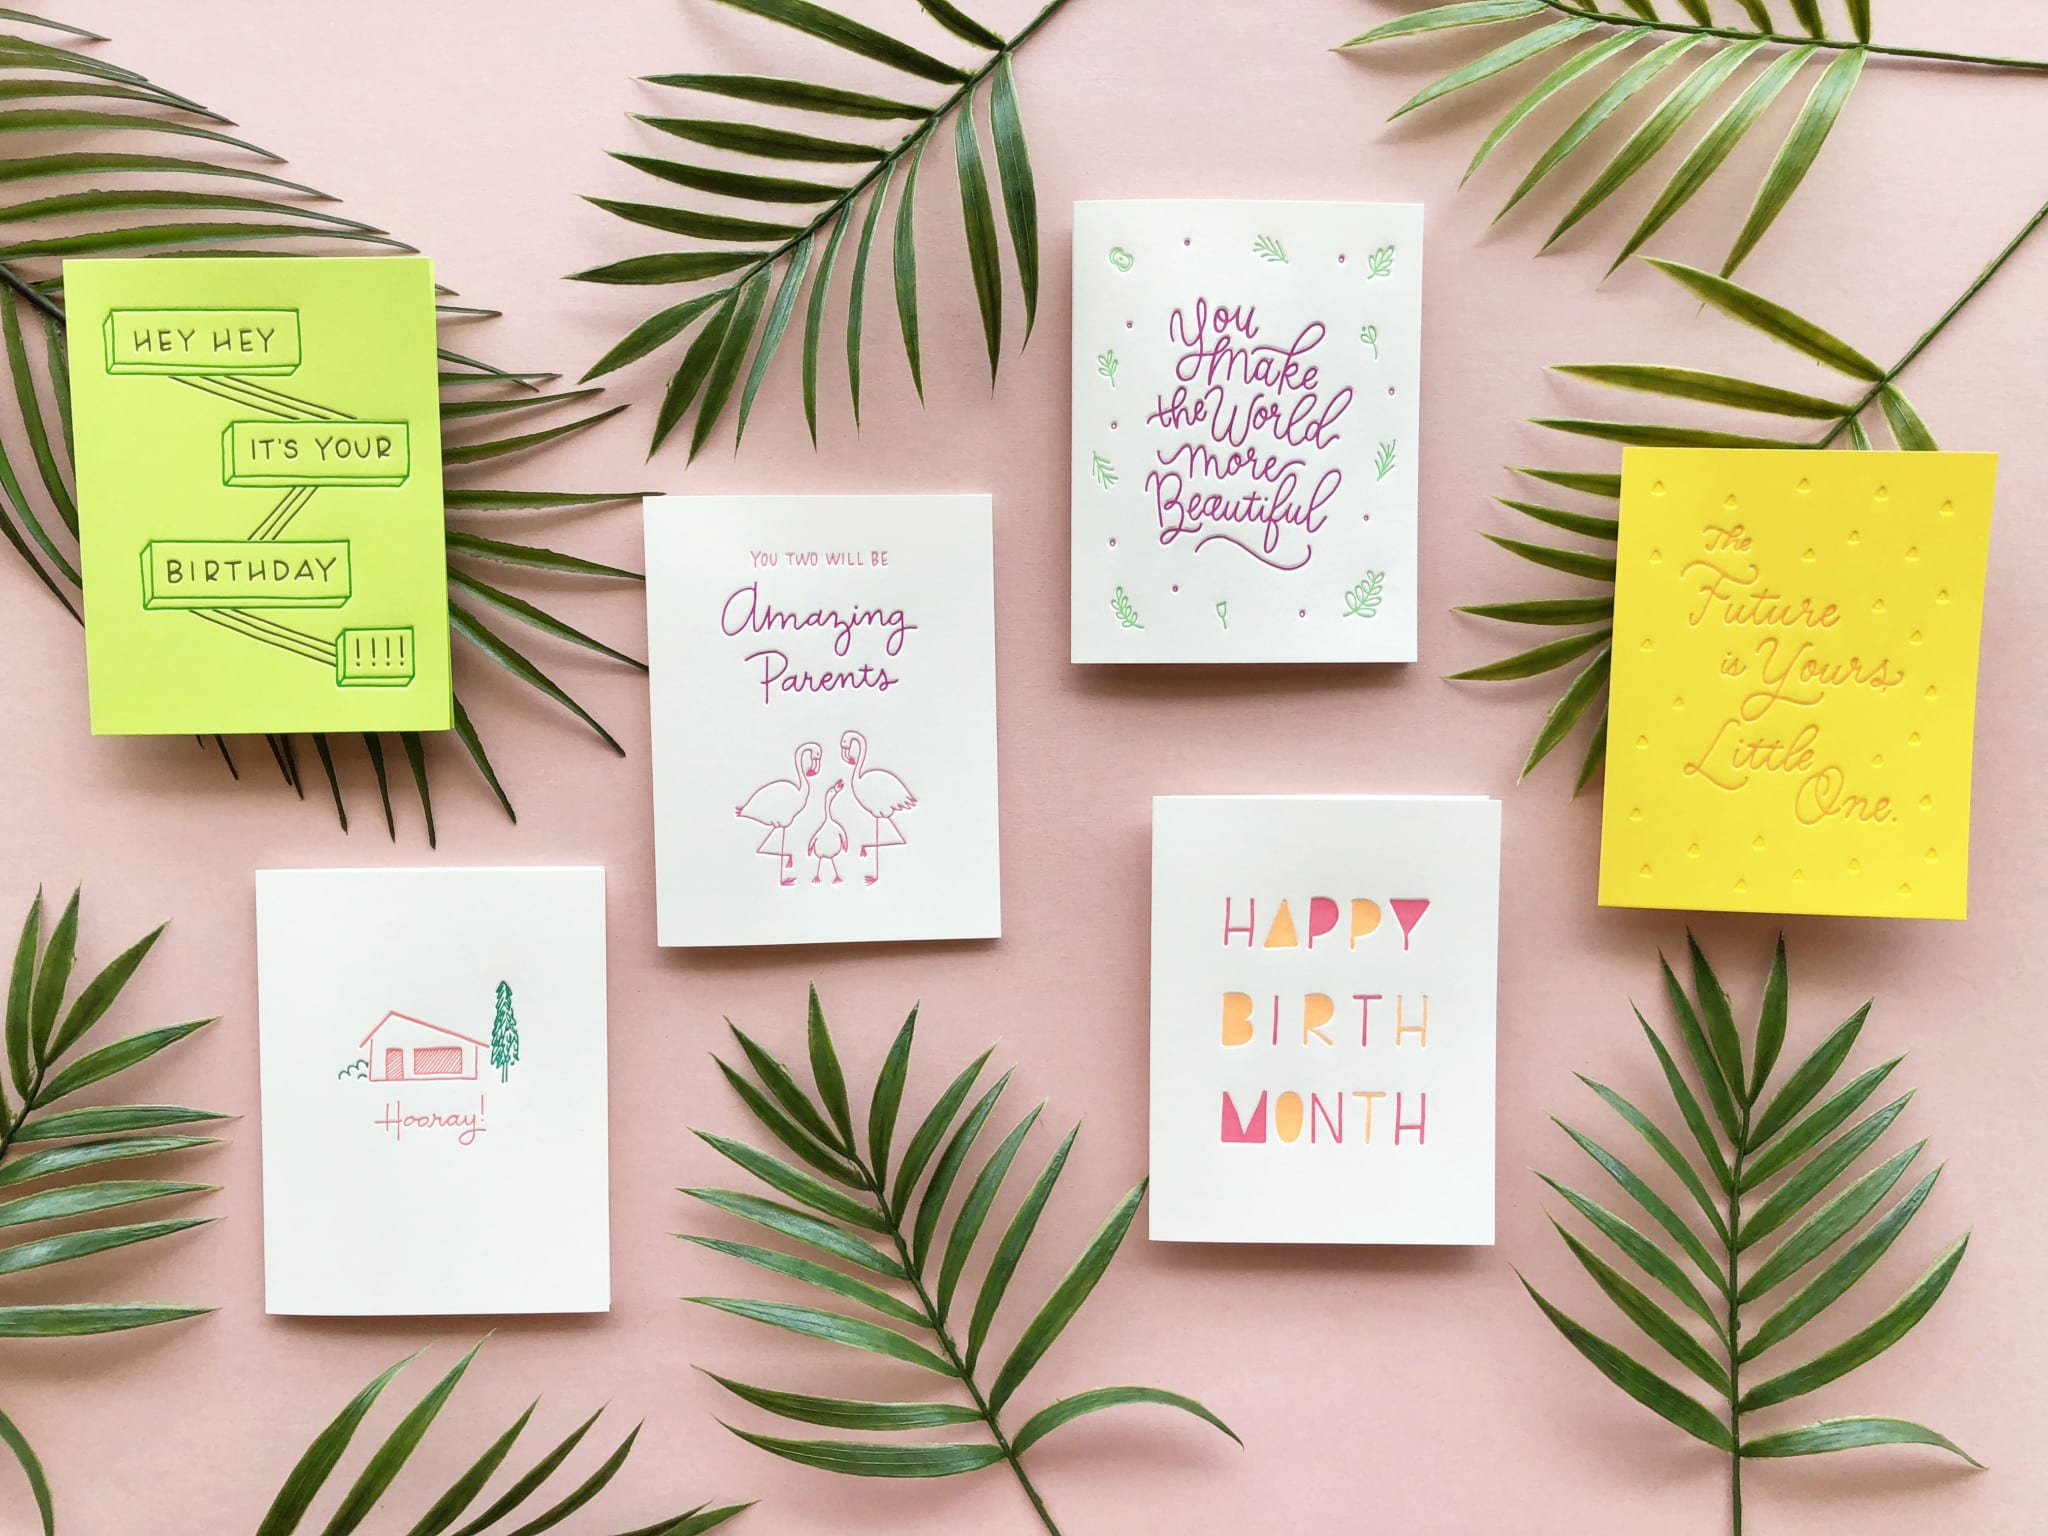 Colorful greeting cards arranged on a light pink background with palm leaves